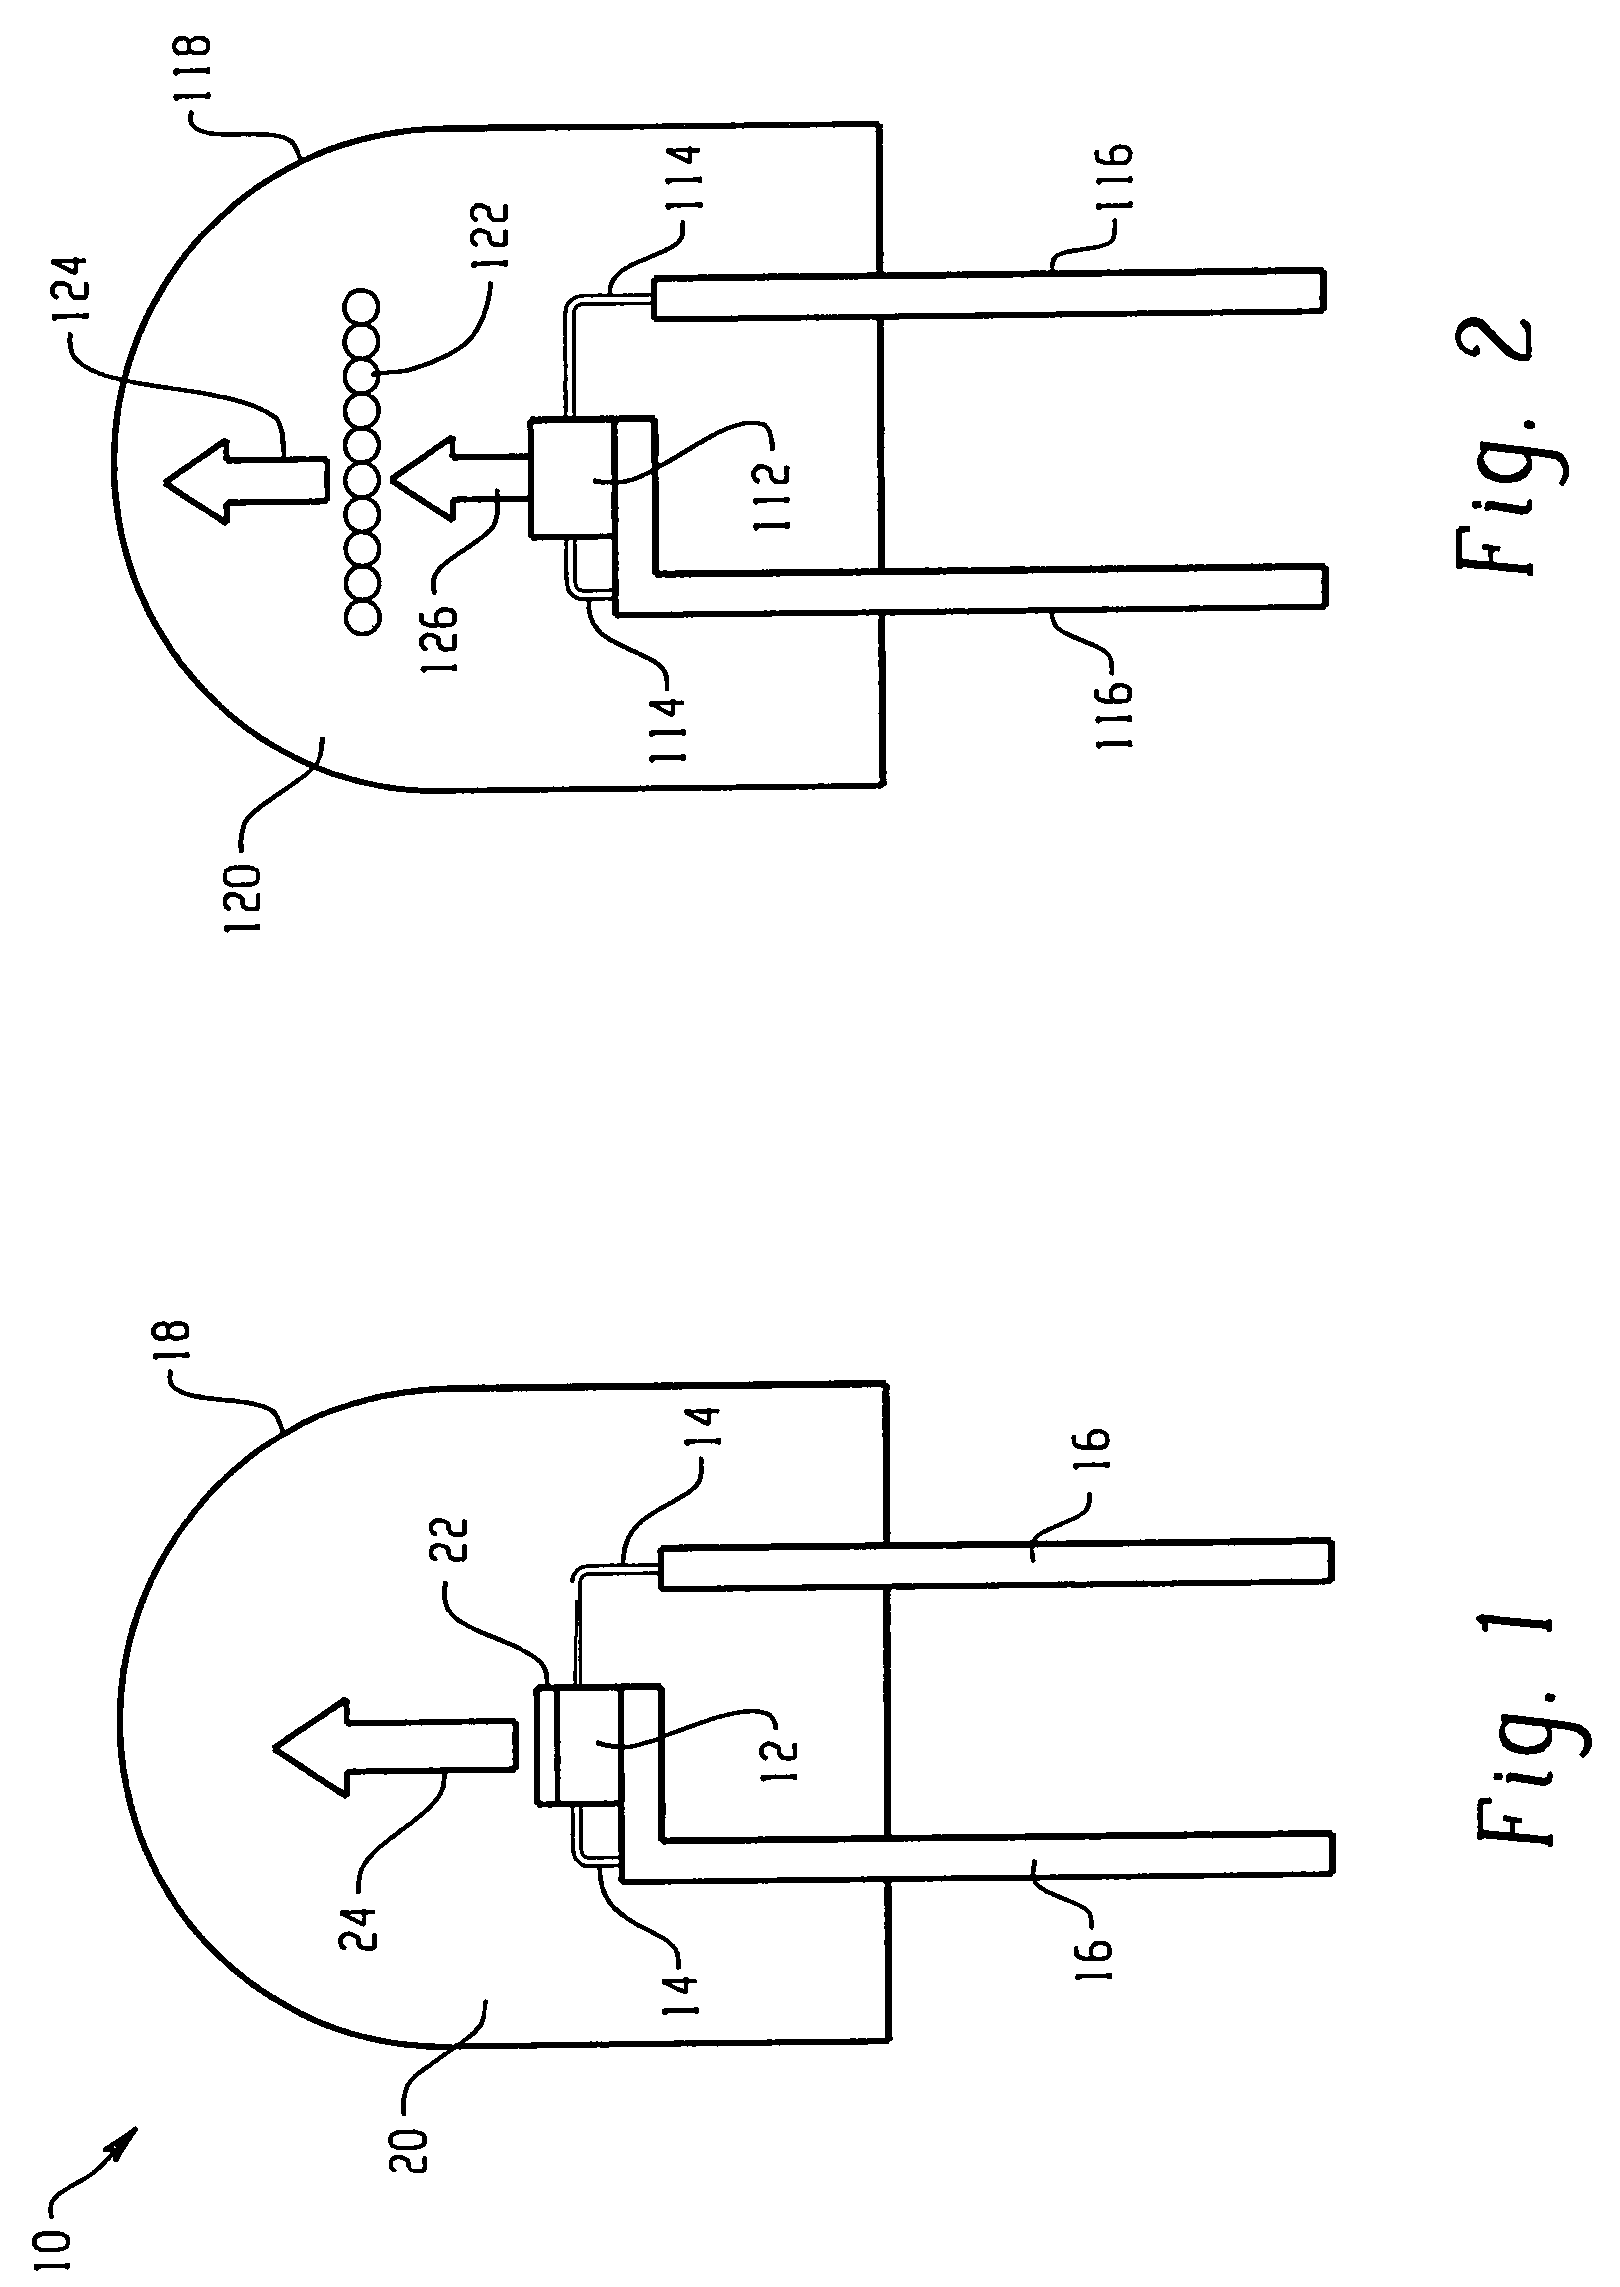 Red line emitting phosphors for use in led applications